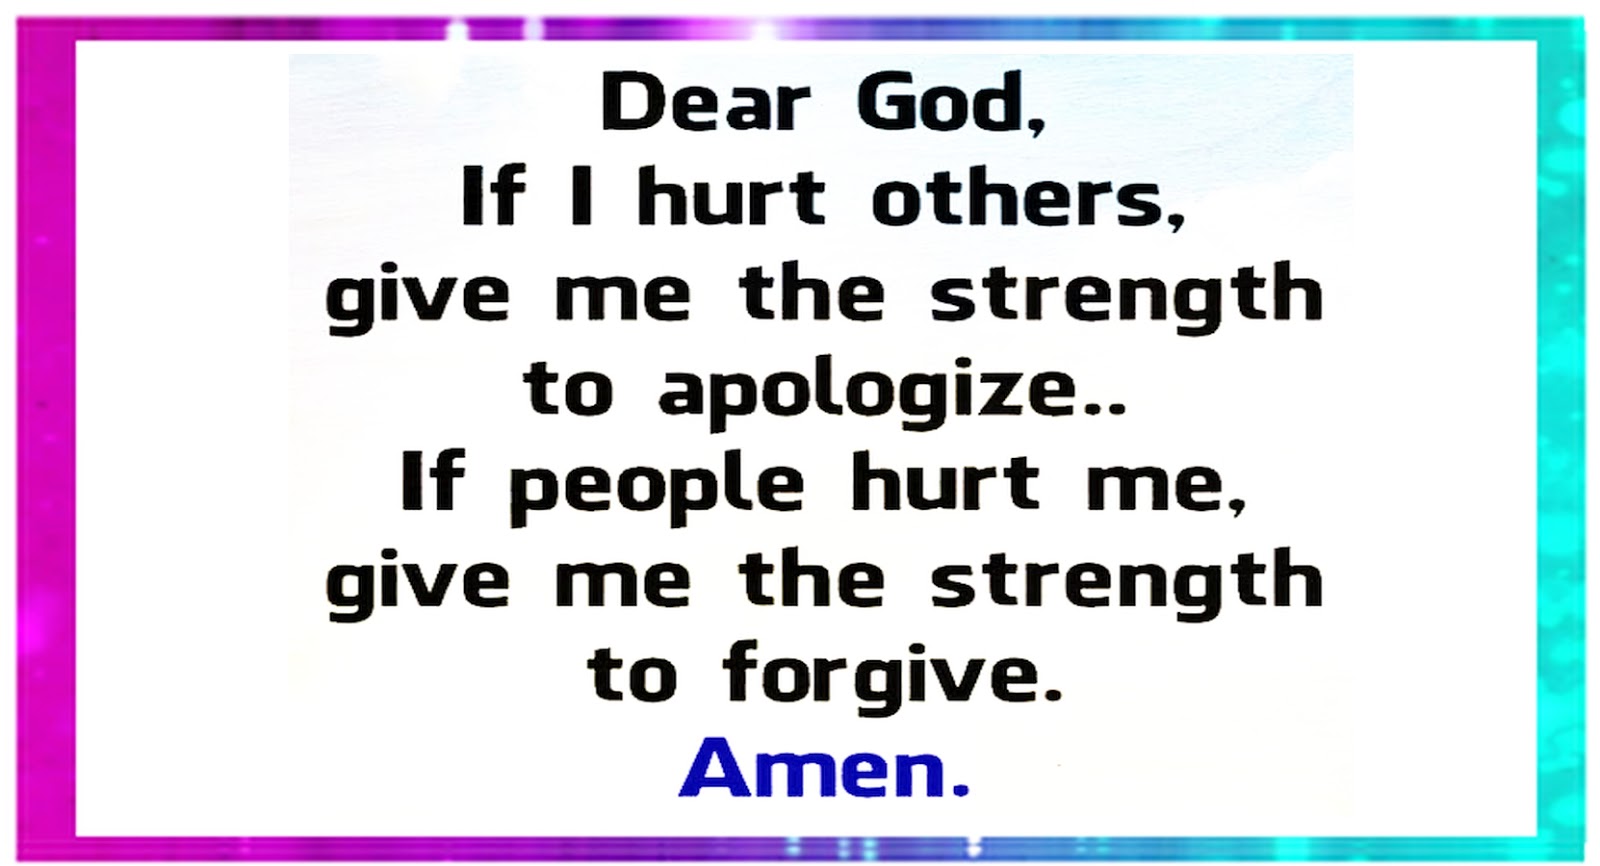 Lord, Please help me to forgive and forget and to move on! Amen.